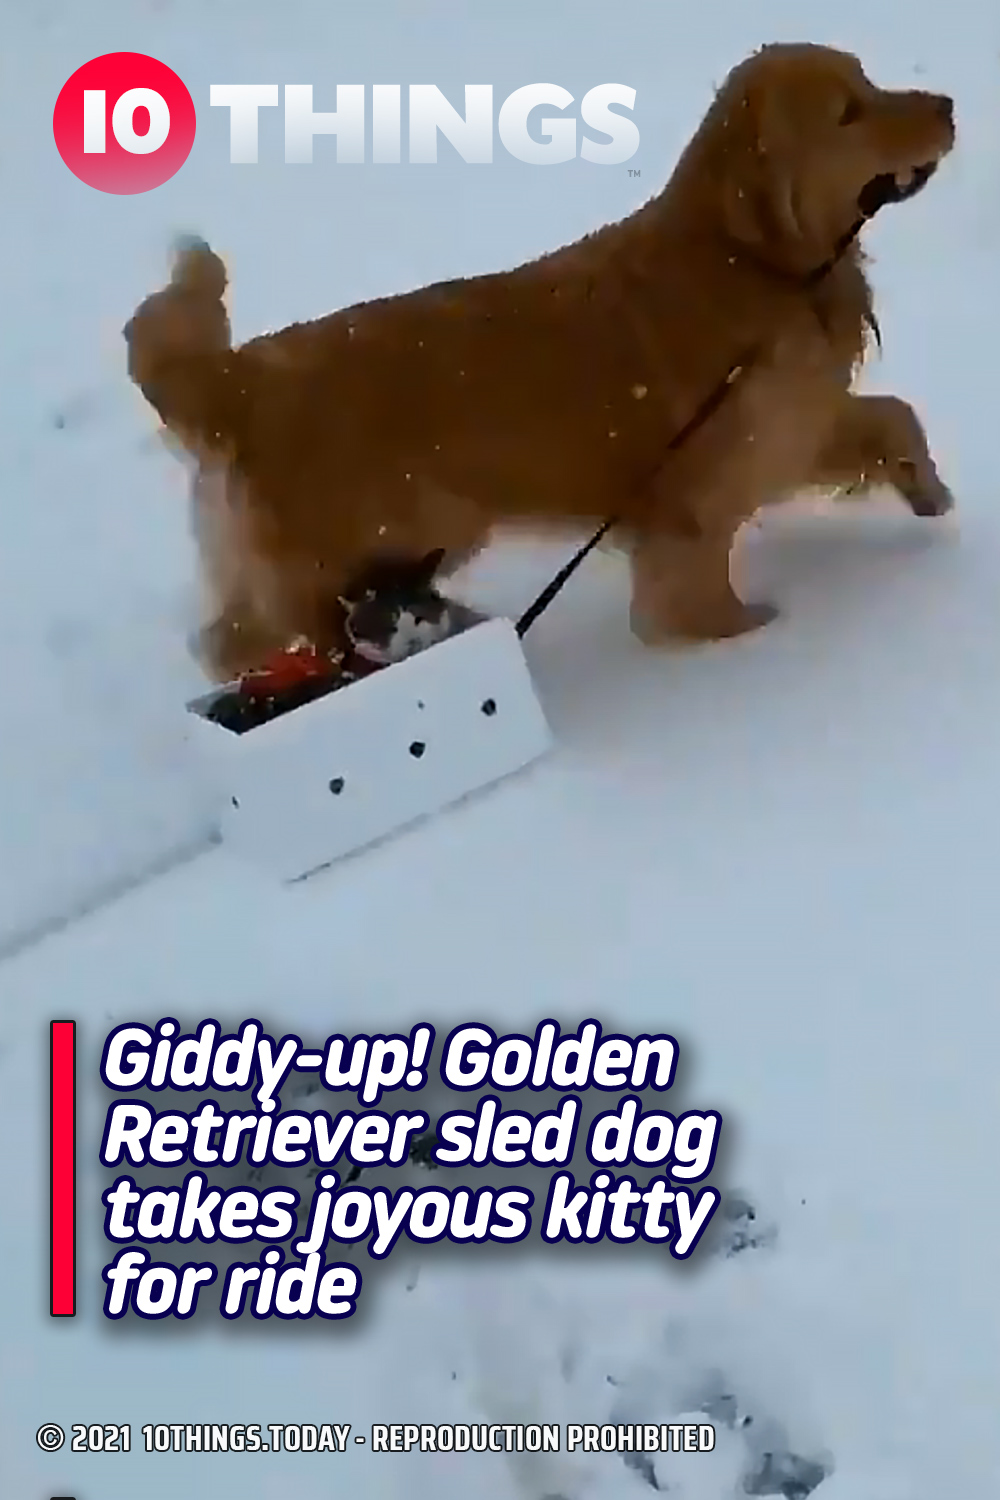 Giddy-up! Golden Retriever sled dog takes joyous kitty for ride